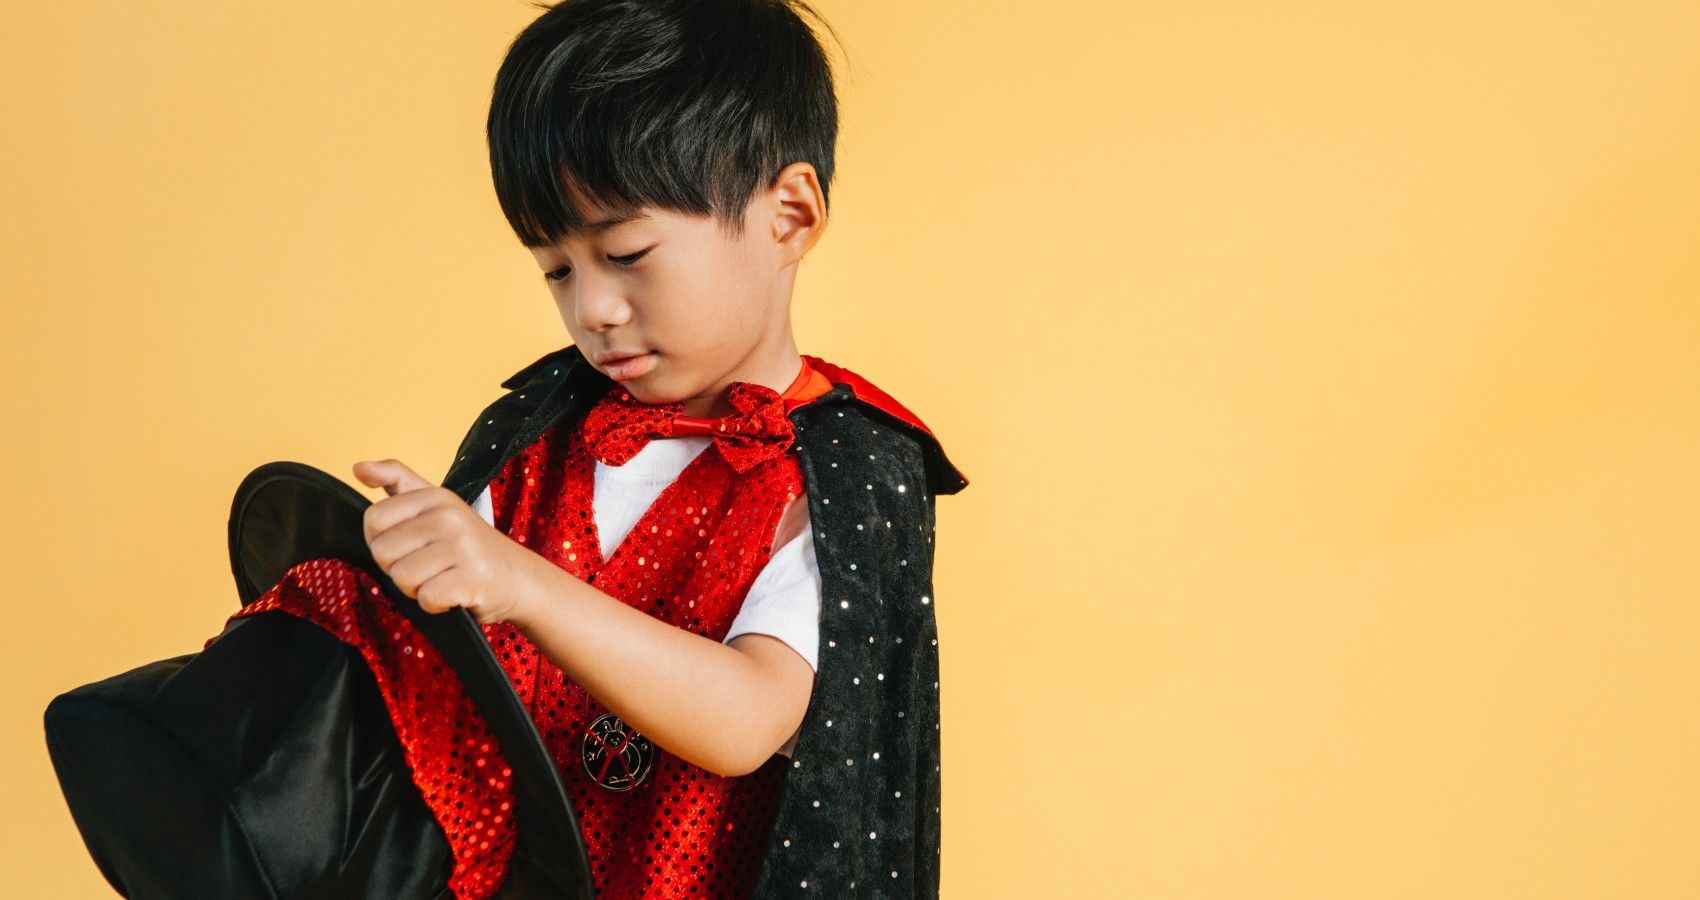 A Child With A Magician Outfit On Doing A Trick